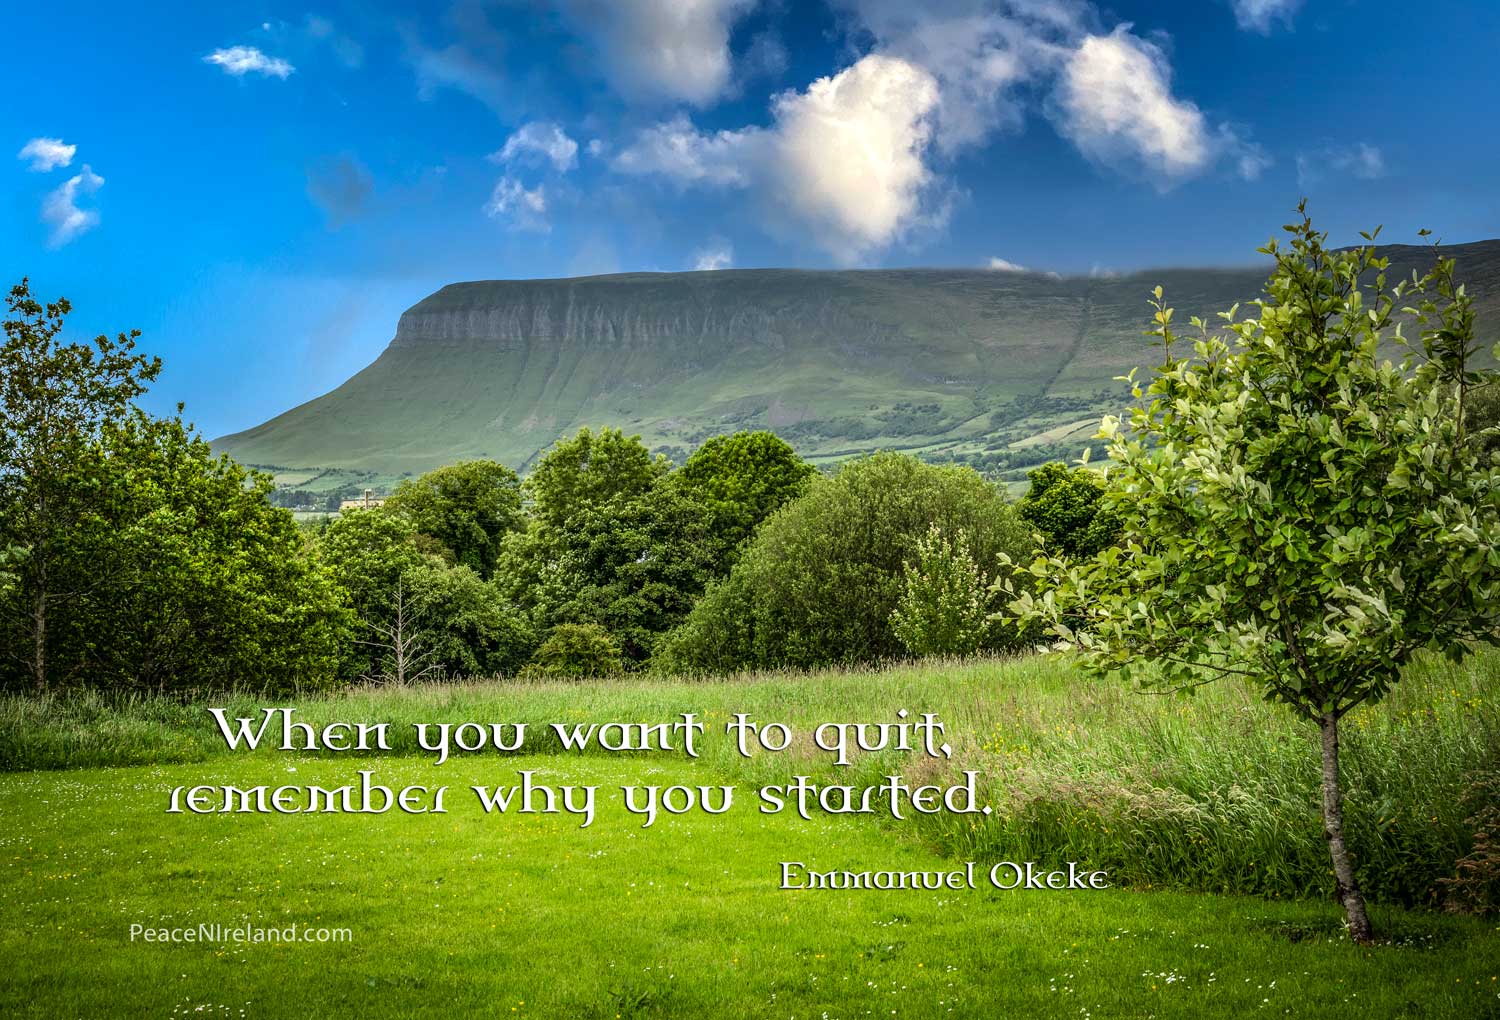 Ben Bulben mountain, from the burial place of W.B. Yeats, at Drumcliffe, County Sligo